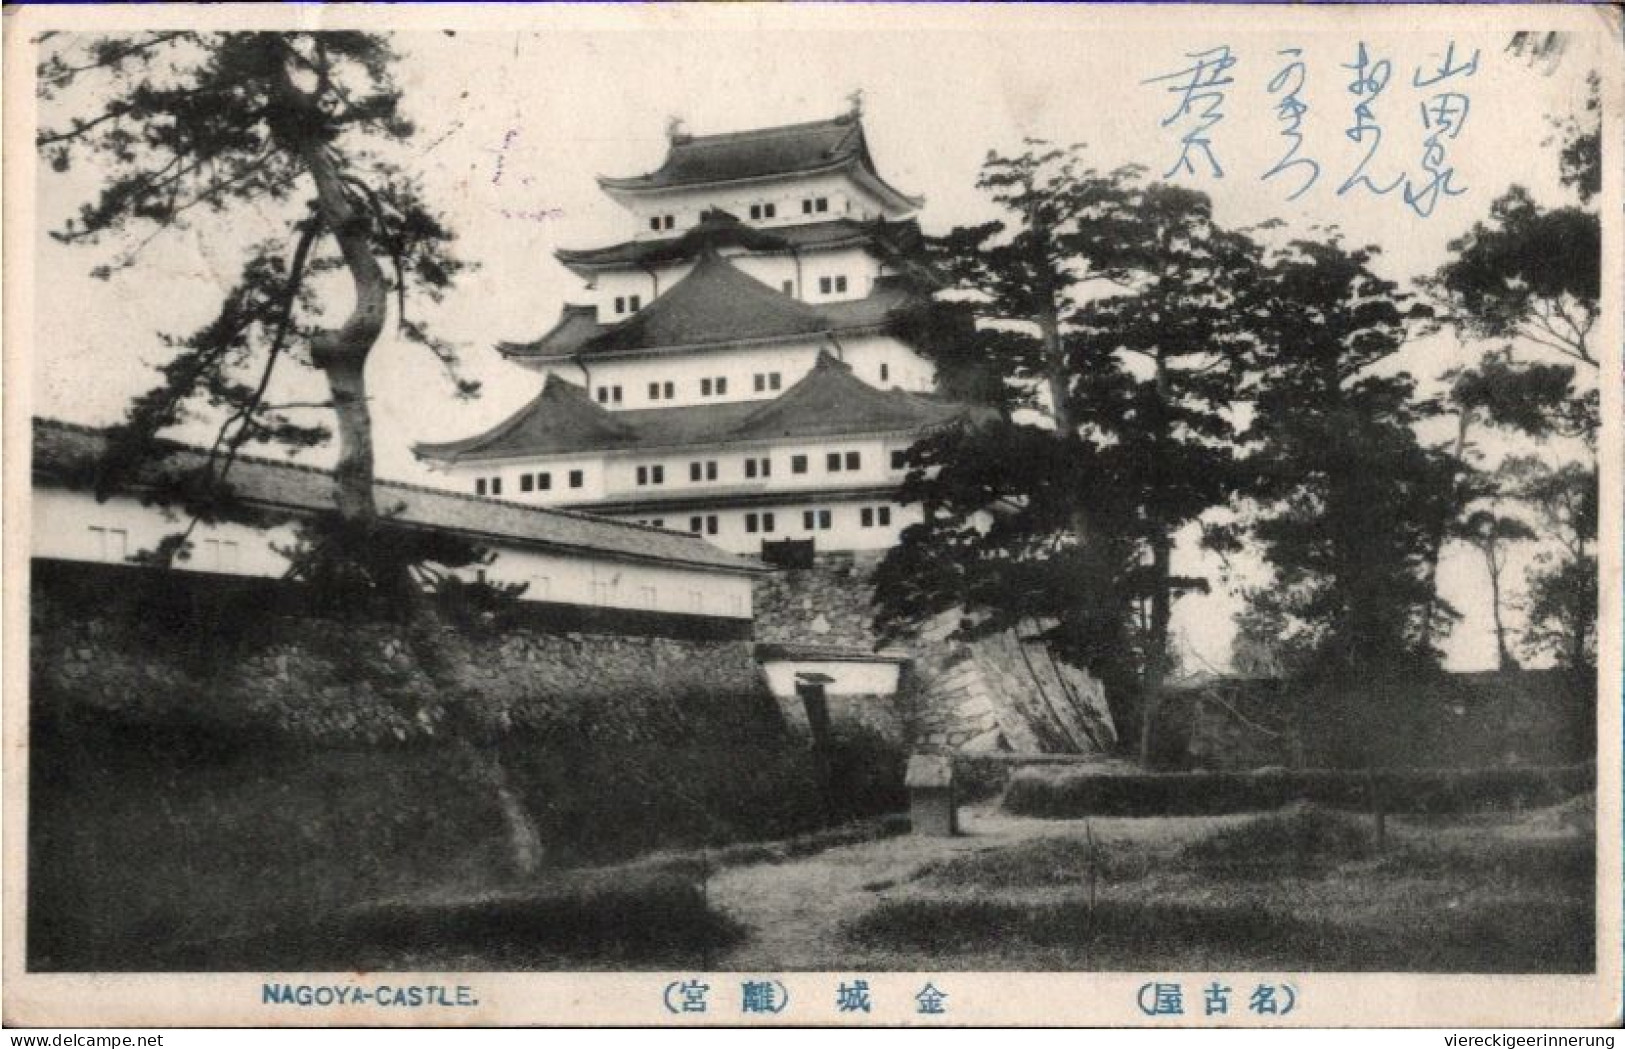 ! Lot of 4 old postcards from Japan to Potsdam , Germany